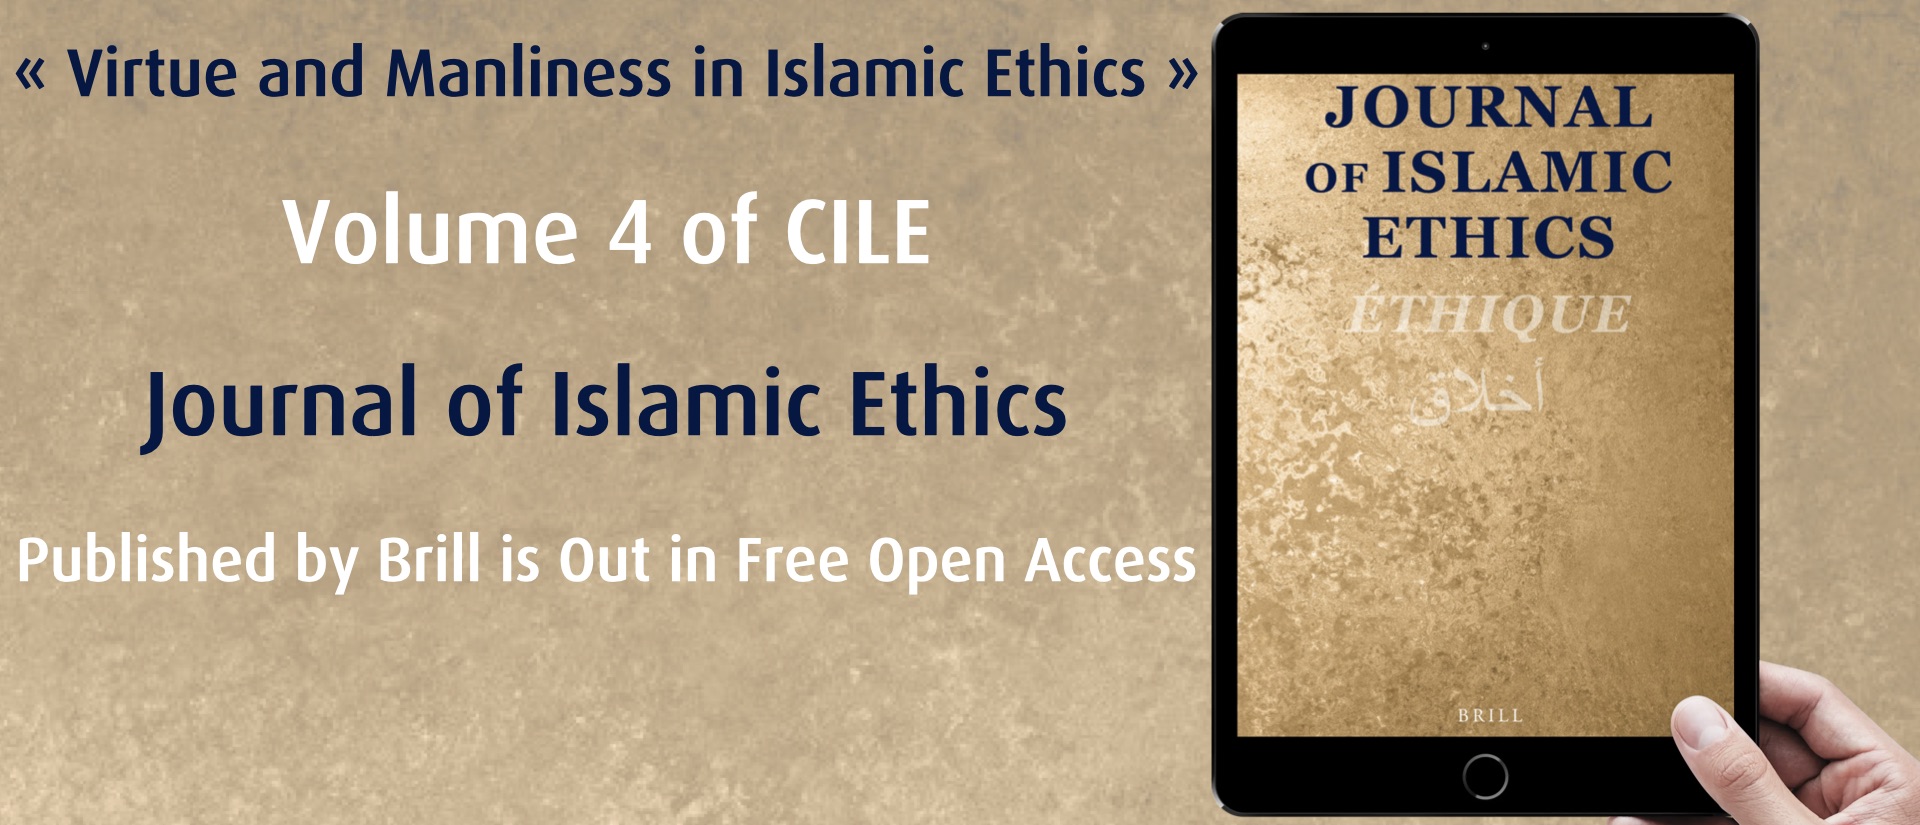 Volume 4 of CILE "Journal of Islamic Ethics" published by Brill is out in free open access